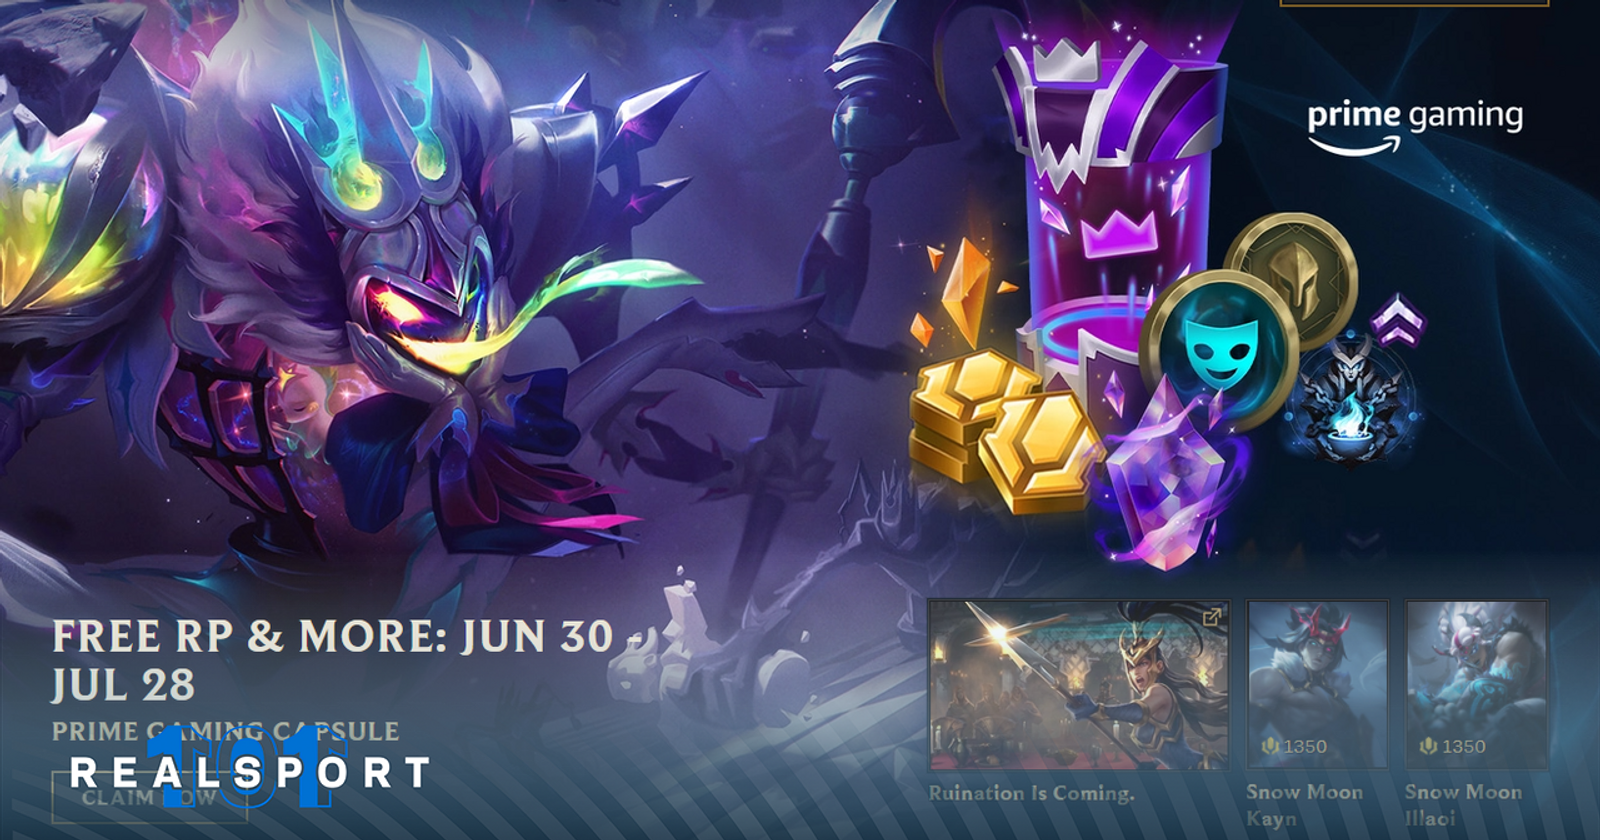 Twitch Prime loot for League of Legends is available now - The Rift Herald